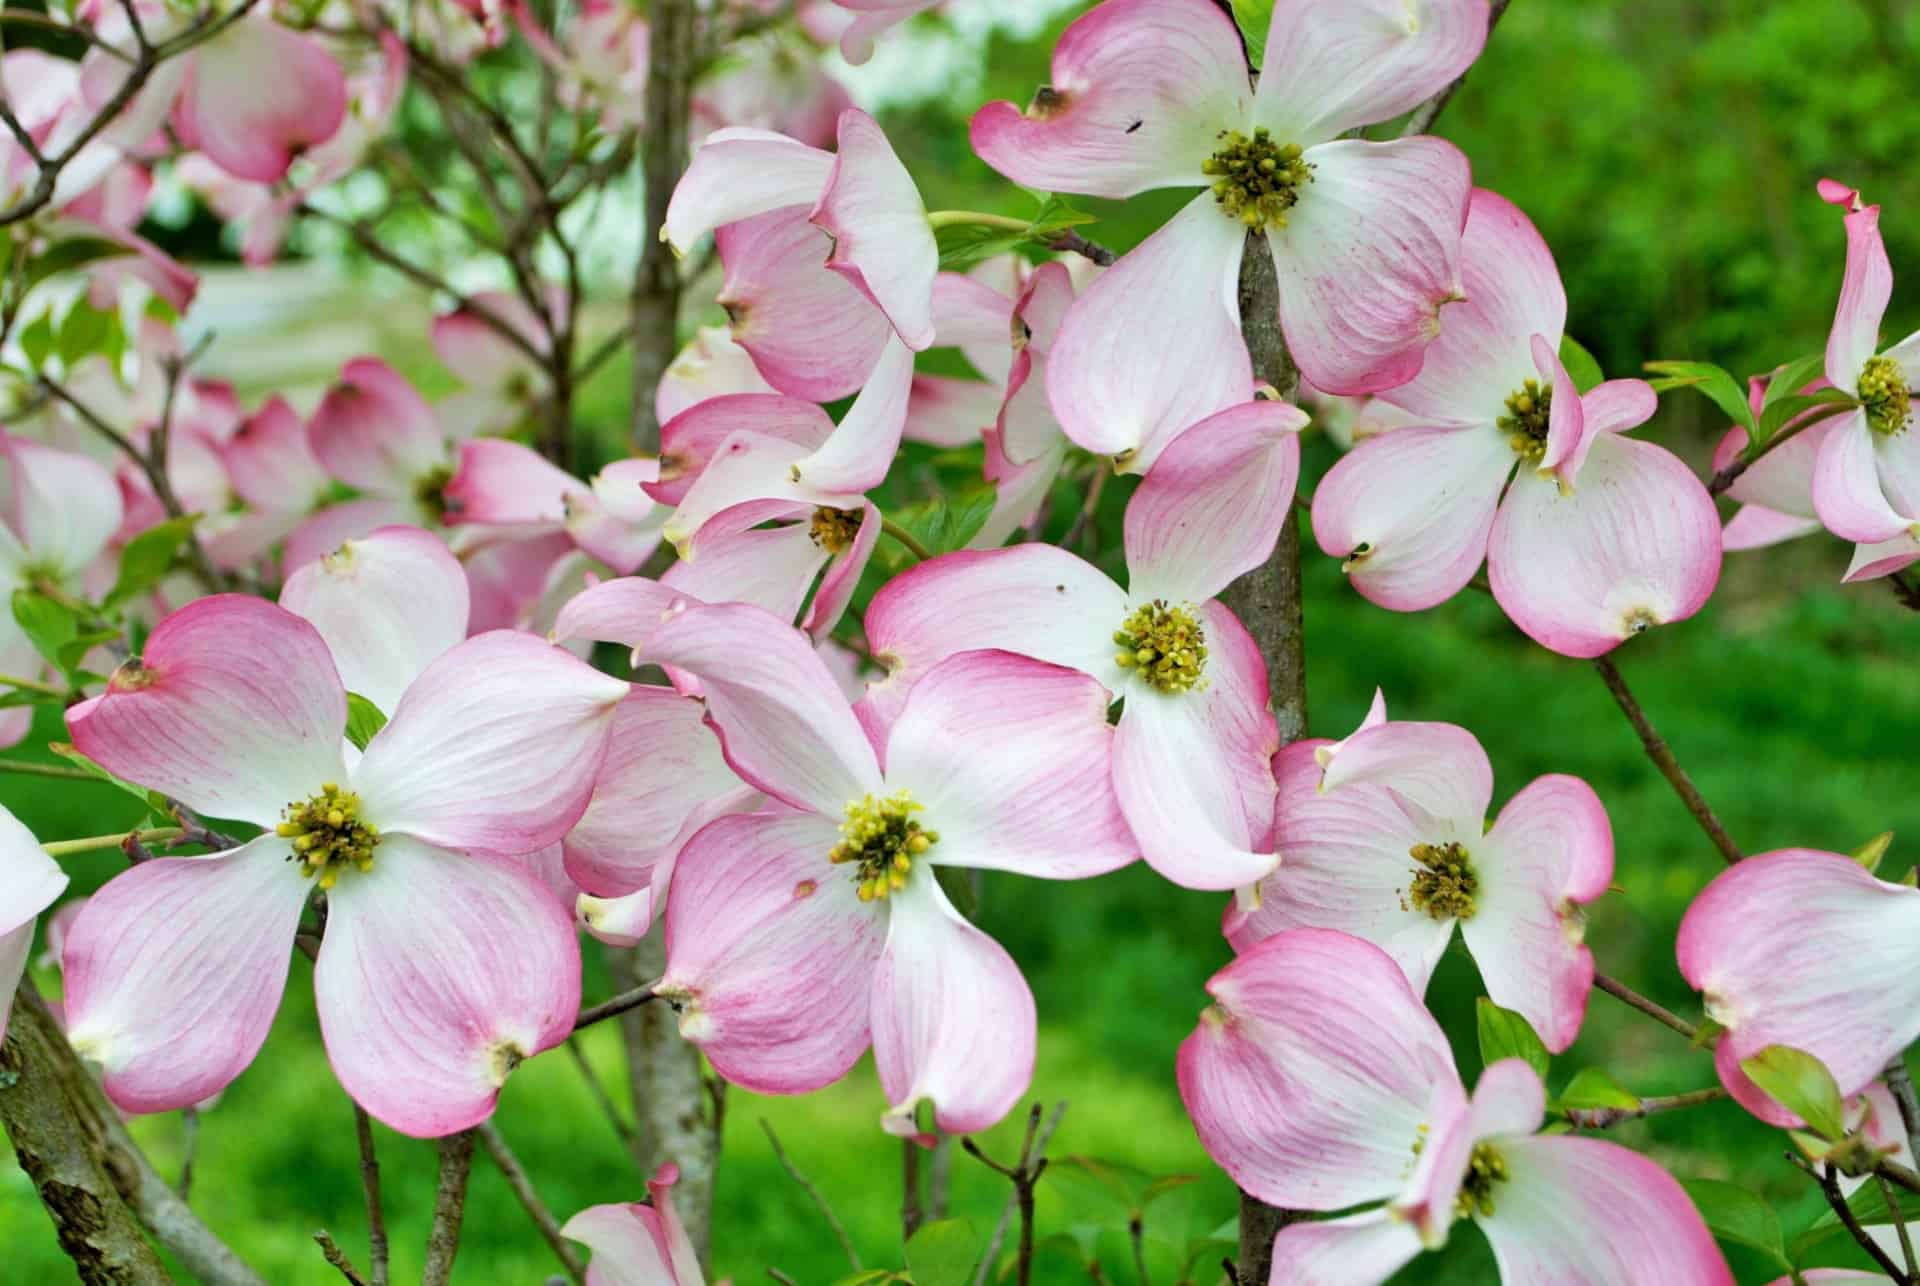 The flowering dogwood is beautiful in all seasons.